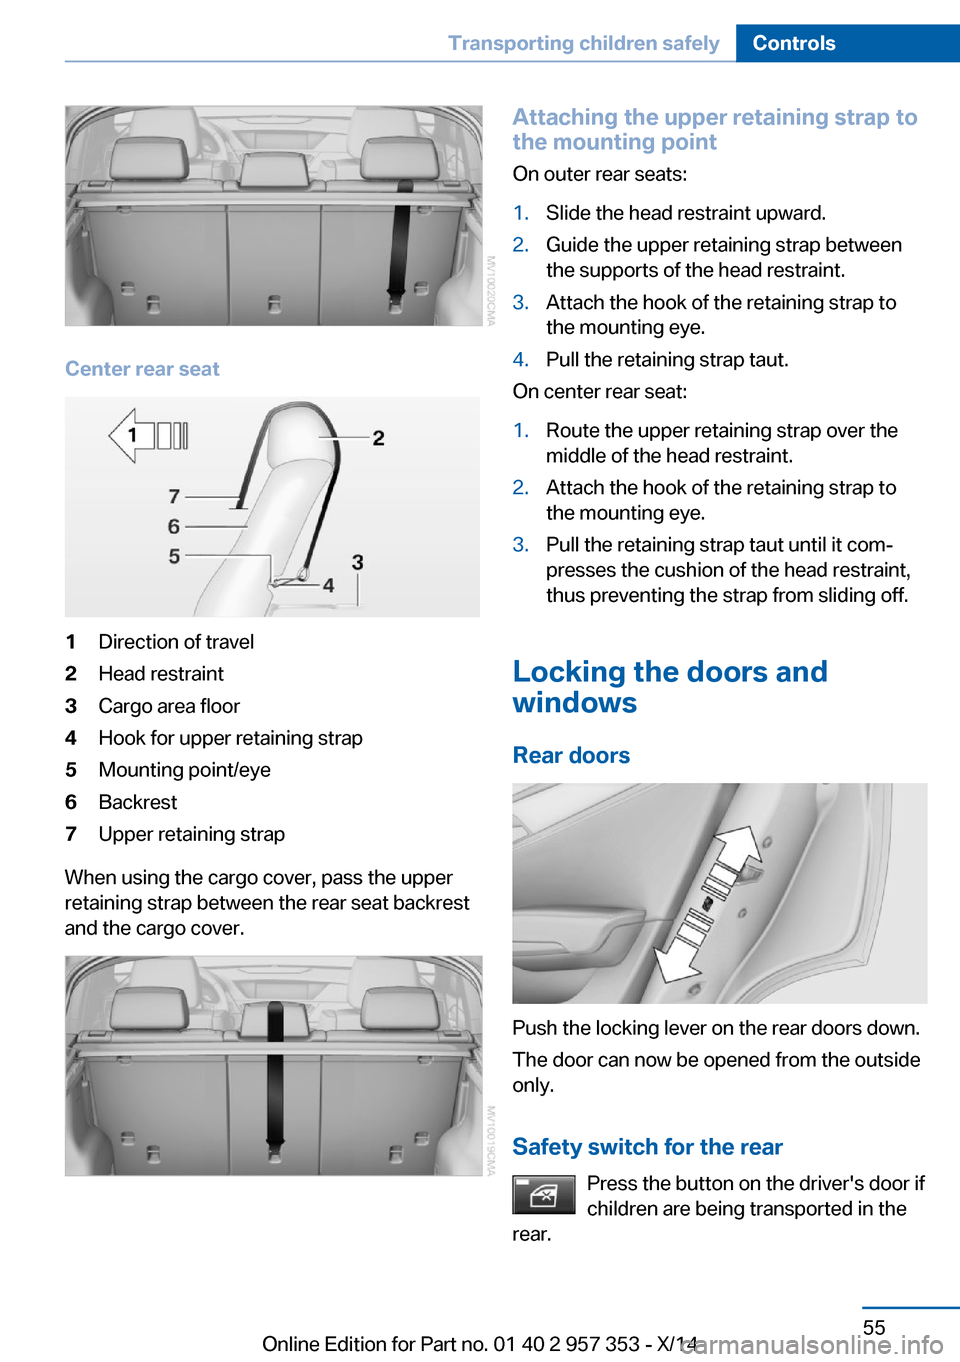 BMW X1 2014 E84 User Guide Center rear seat
1Direction of travel2Head restraint3Cargo area floor4Hook for upper retaining strap5Mounting point/eye6Backrest7Upper retaining strap
When using the cargo cover, pass the upper
retain